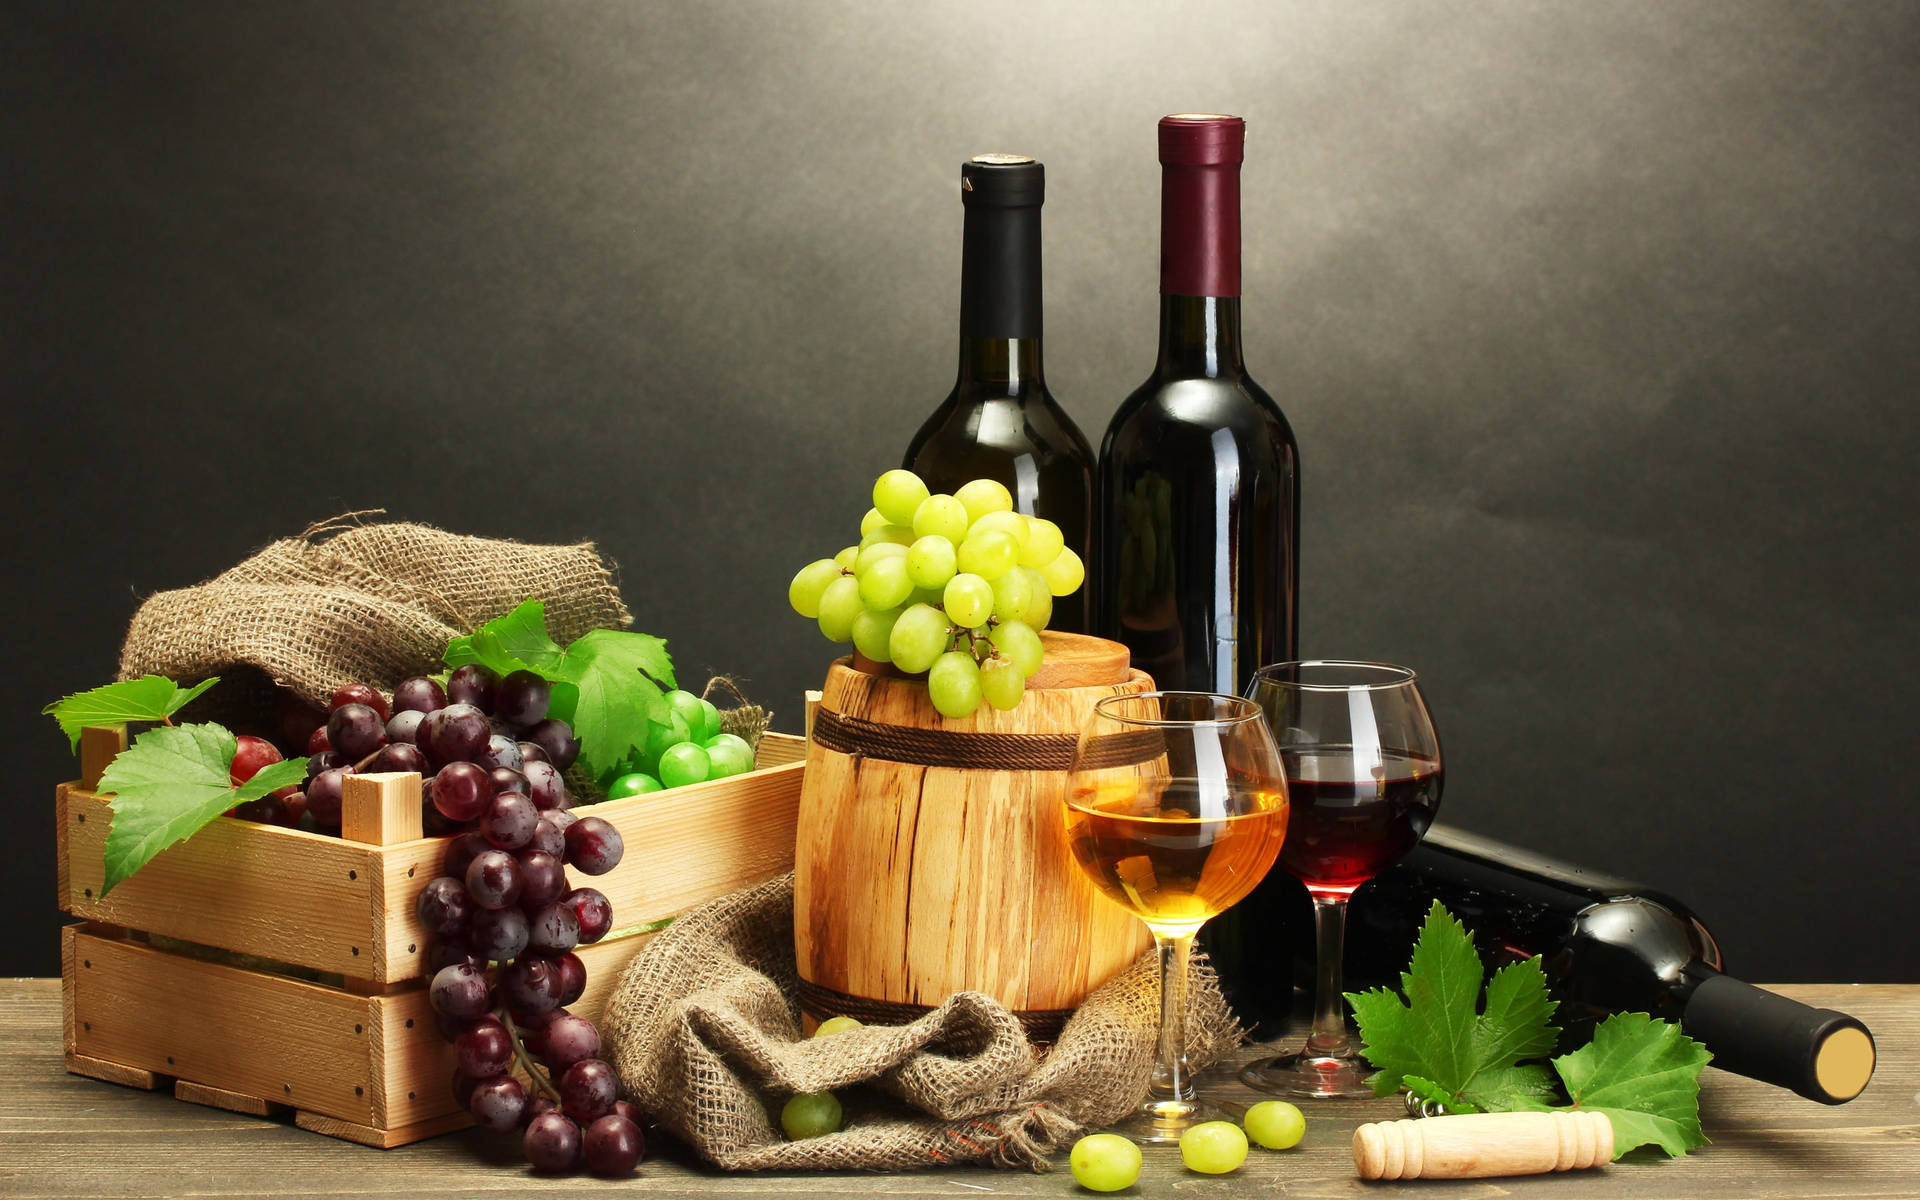 Static Wine Photography Wallpaper